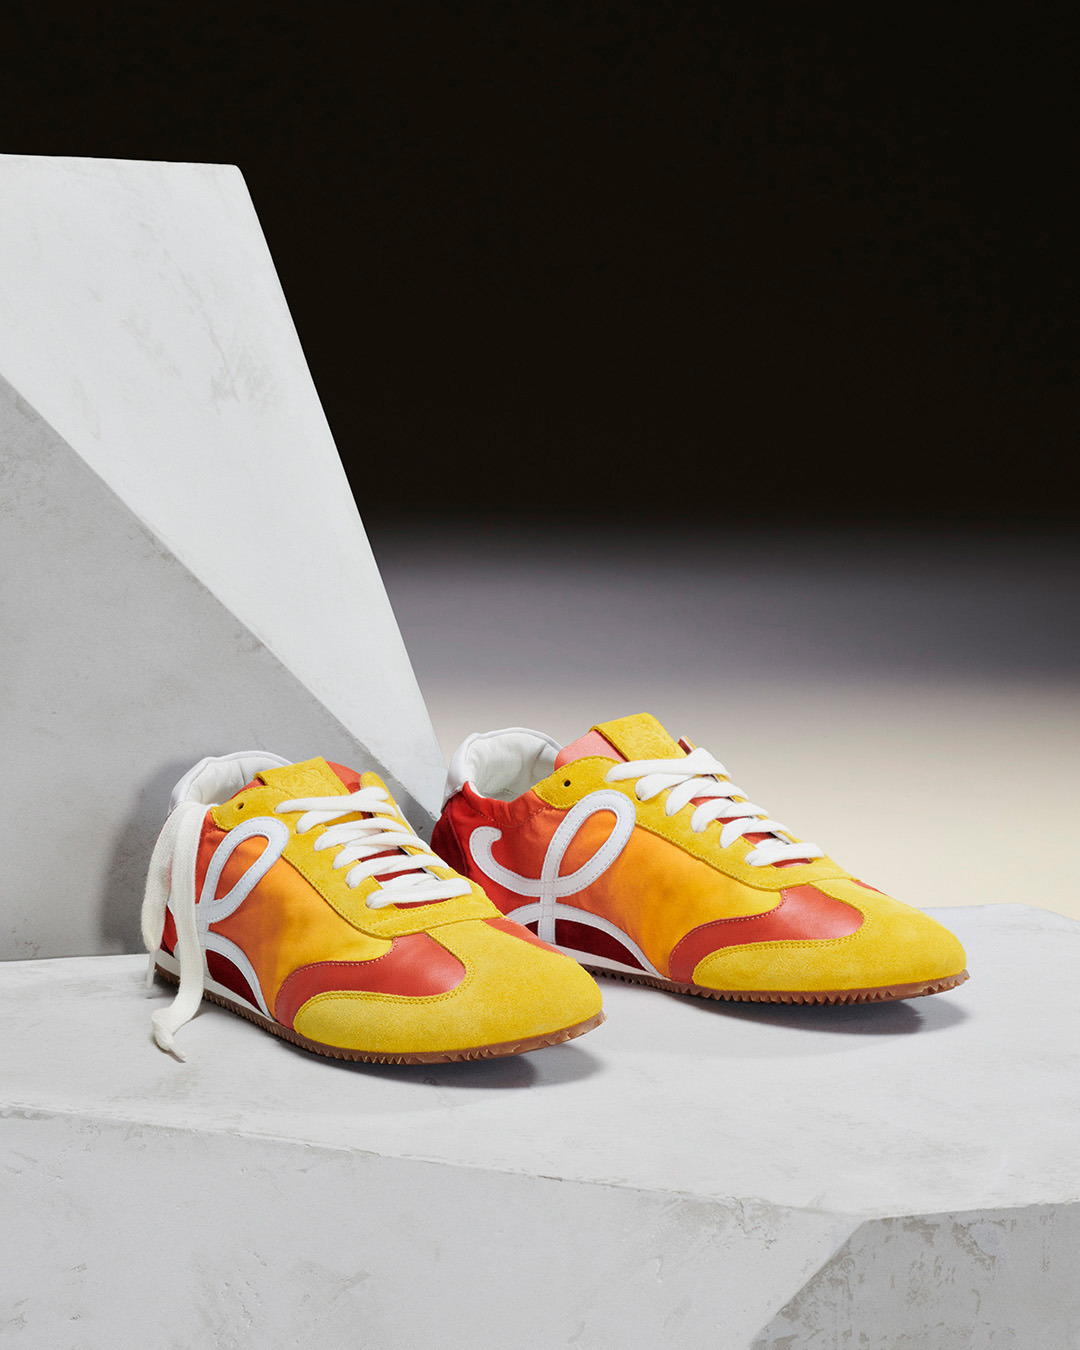 LOEWE - The Ballet Runner arrives in new colourways.

A lightweight sneaker with supple sole and elasticated sides combining the construction of a ballet pump with the style of a 1970s track shoe.

Av...